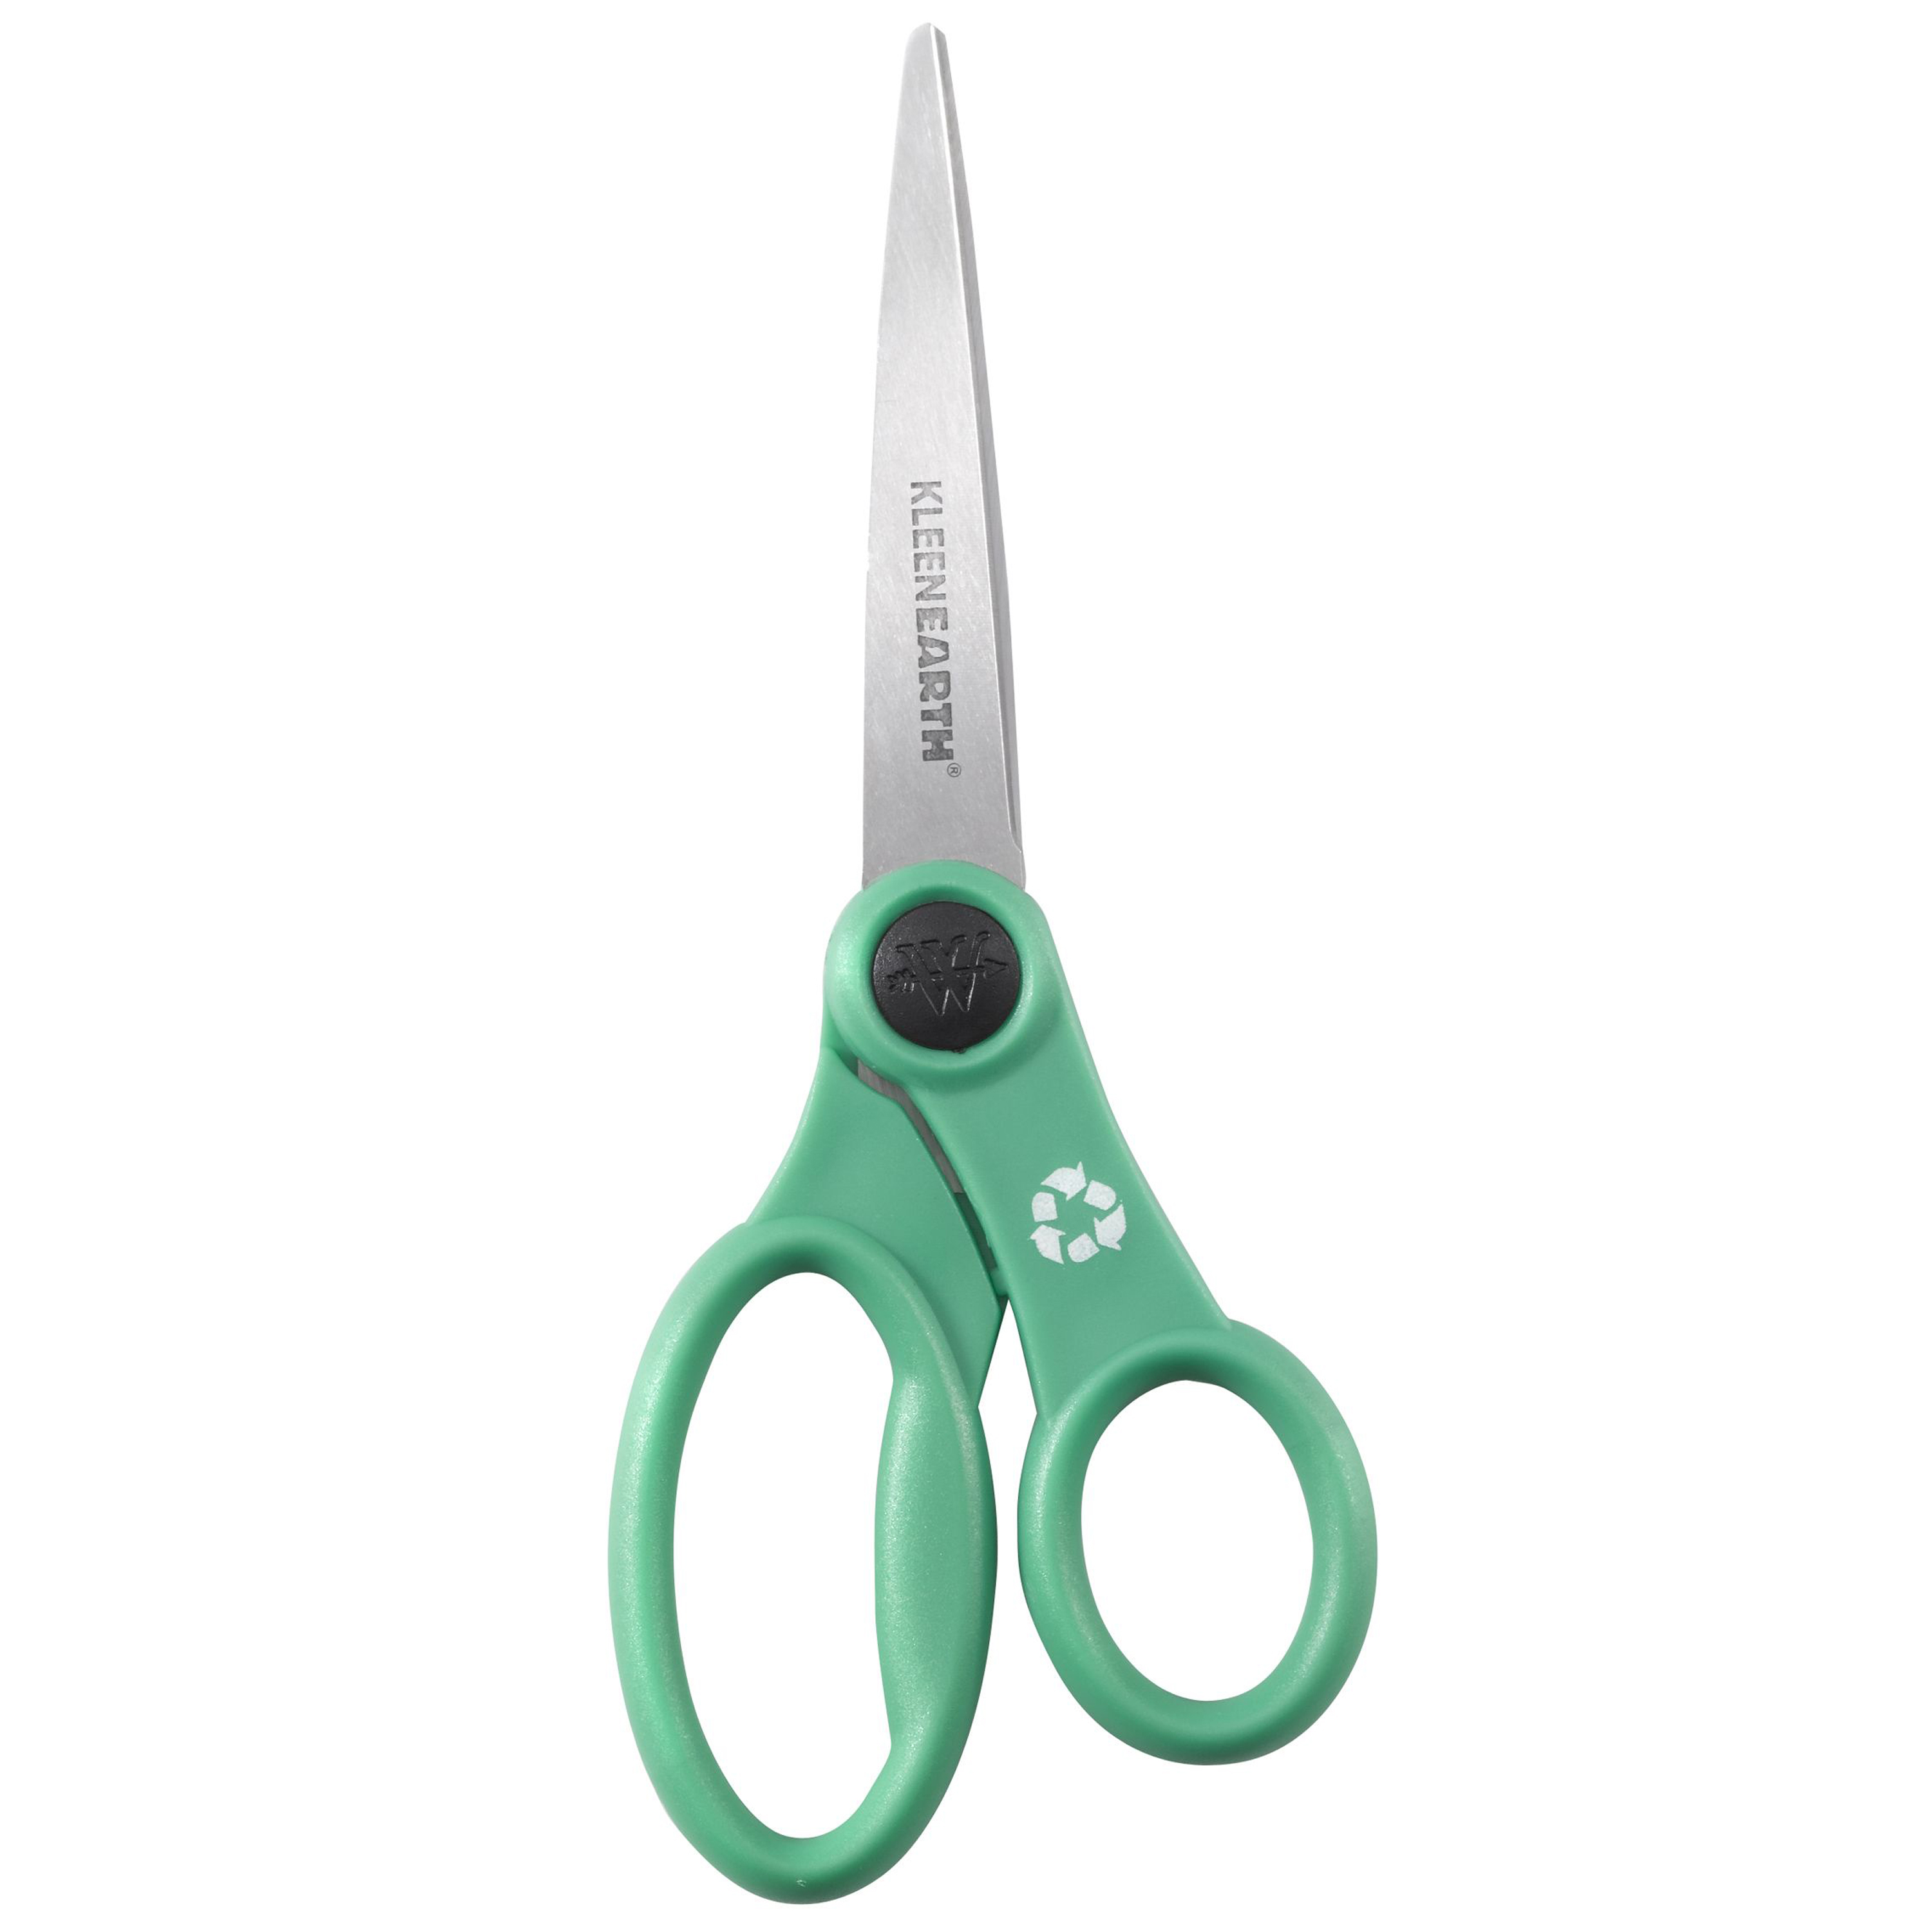 Westcott Kleenearth Recycled Scissors, 8", Straight, Anti-Microbial, Stainless Steel, for Office, Green, 1-Count - image 1 of 8